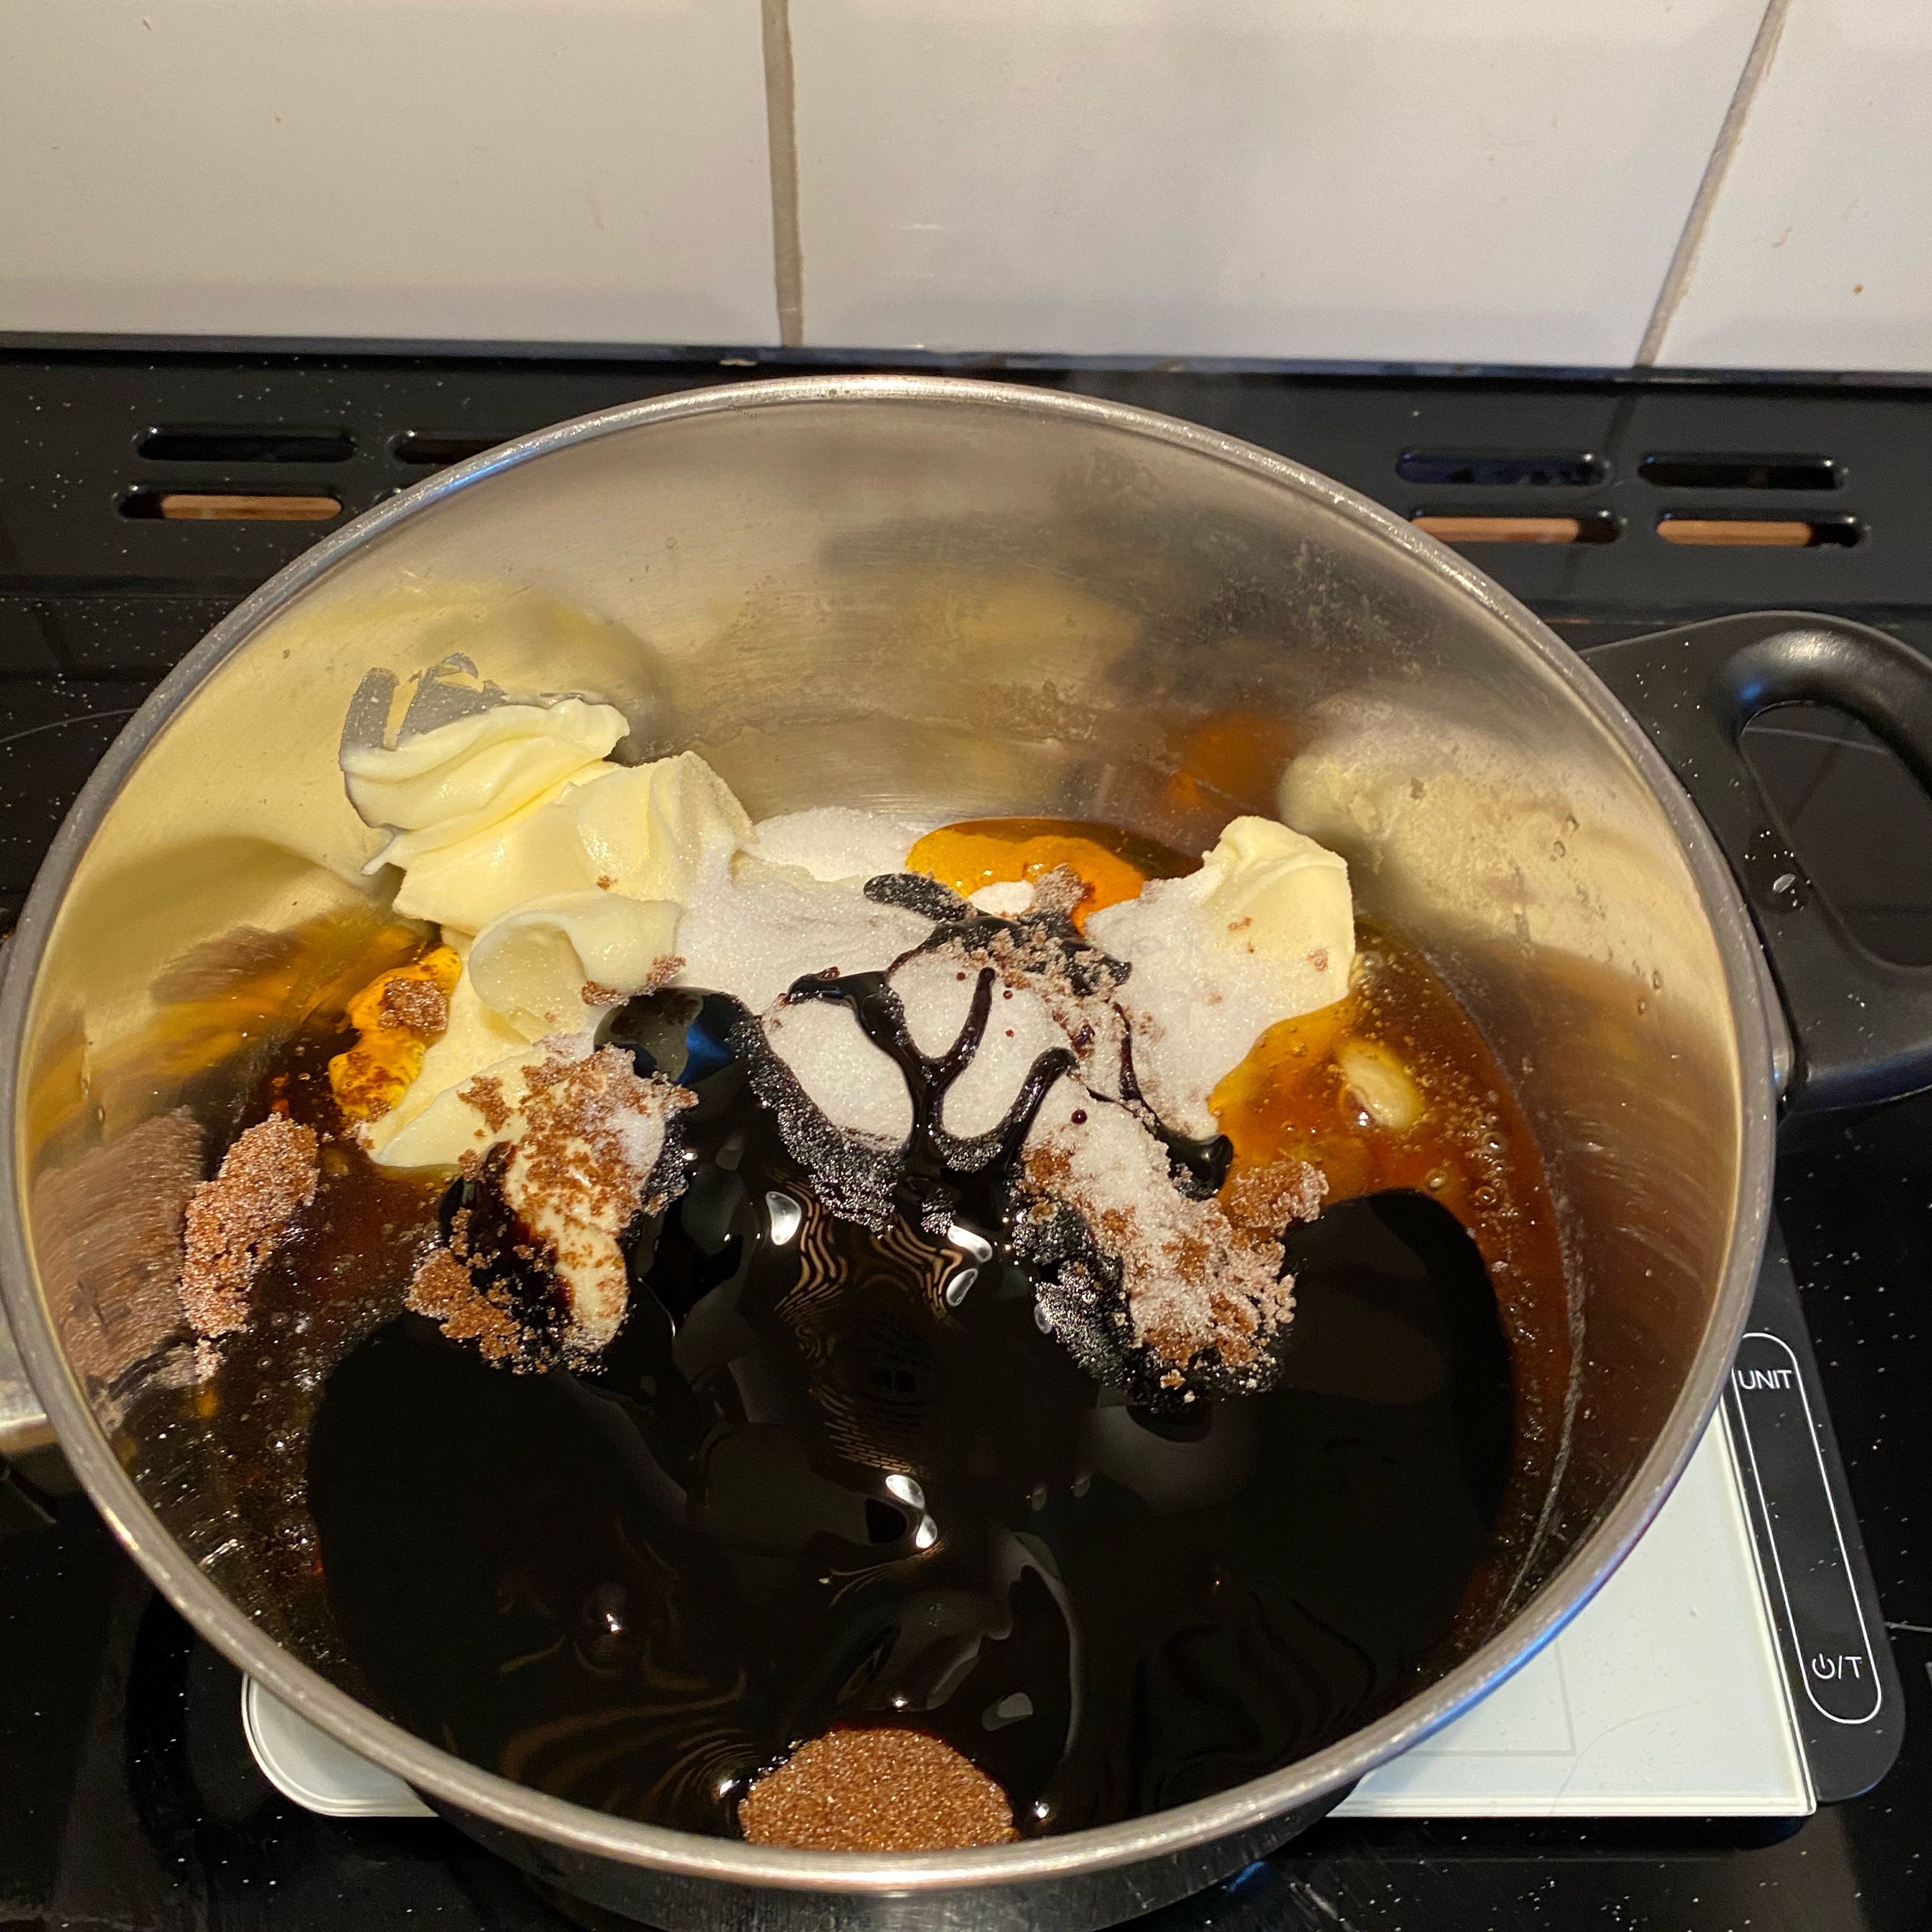 Melt sugar, butter, treacle and syrup in a pan